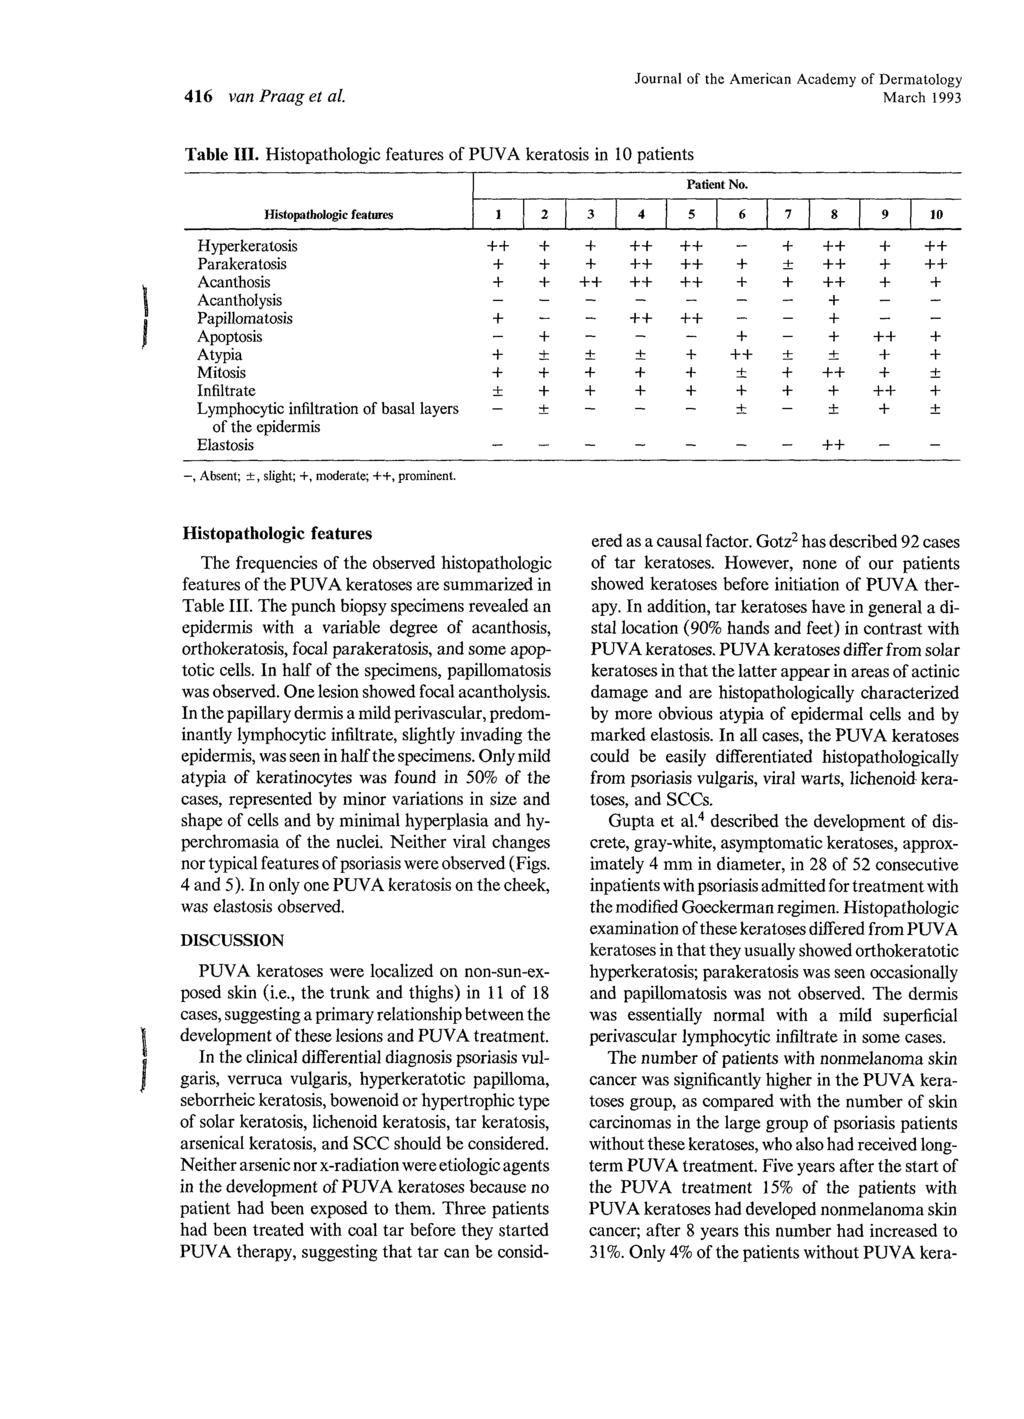 416 van Praag et al. Journal of the American Academy of Dermatology March 1993 Table III. Histopathologic features of PUVA keratosis in 10 patients Histopathologic features 1 2 3 4 5 Patient No.